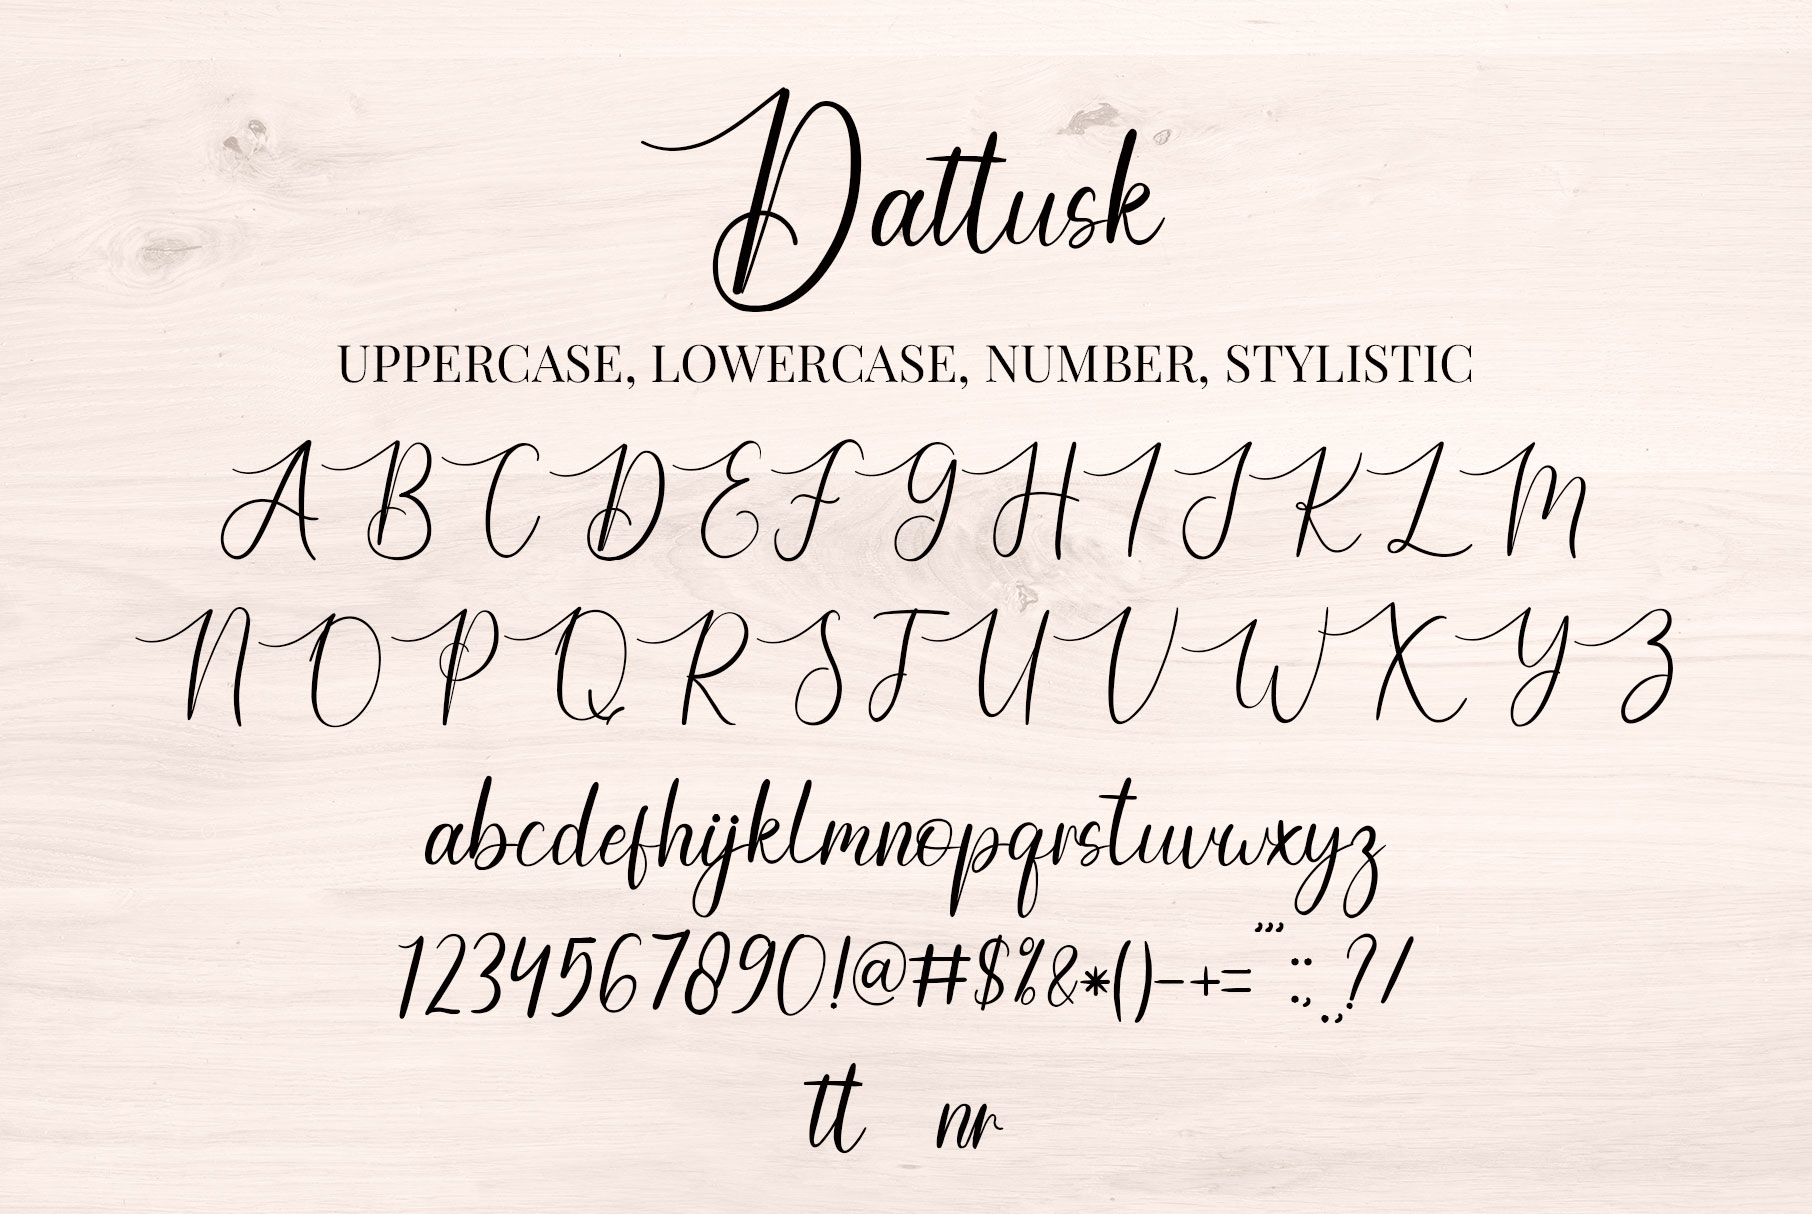 Image with symbols and letters of Dattusk enchanting font